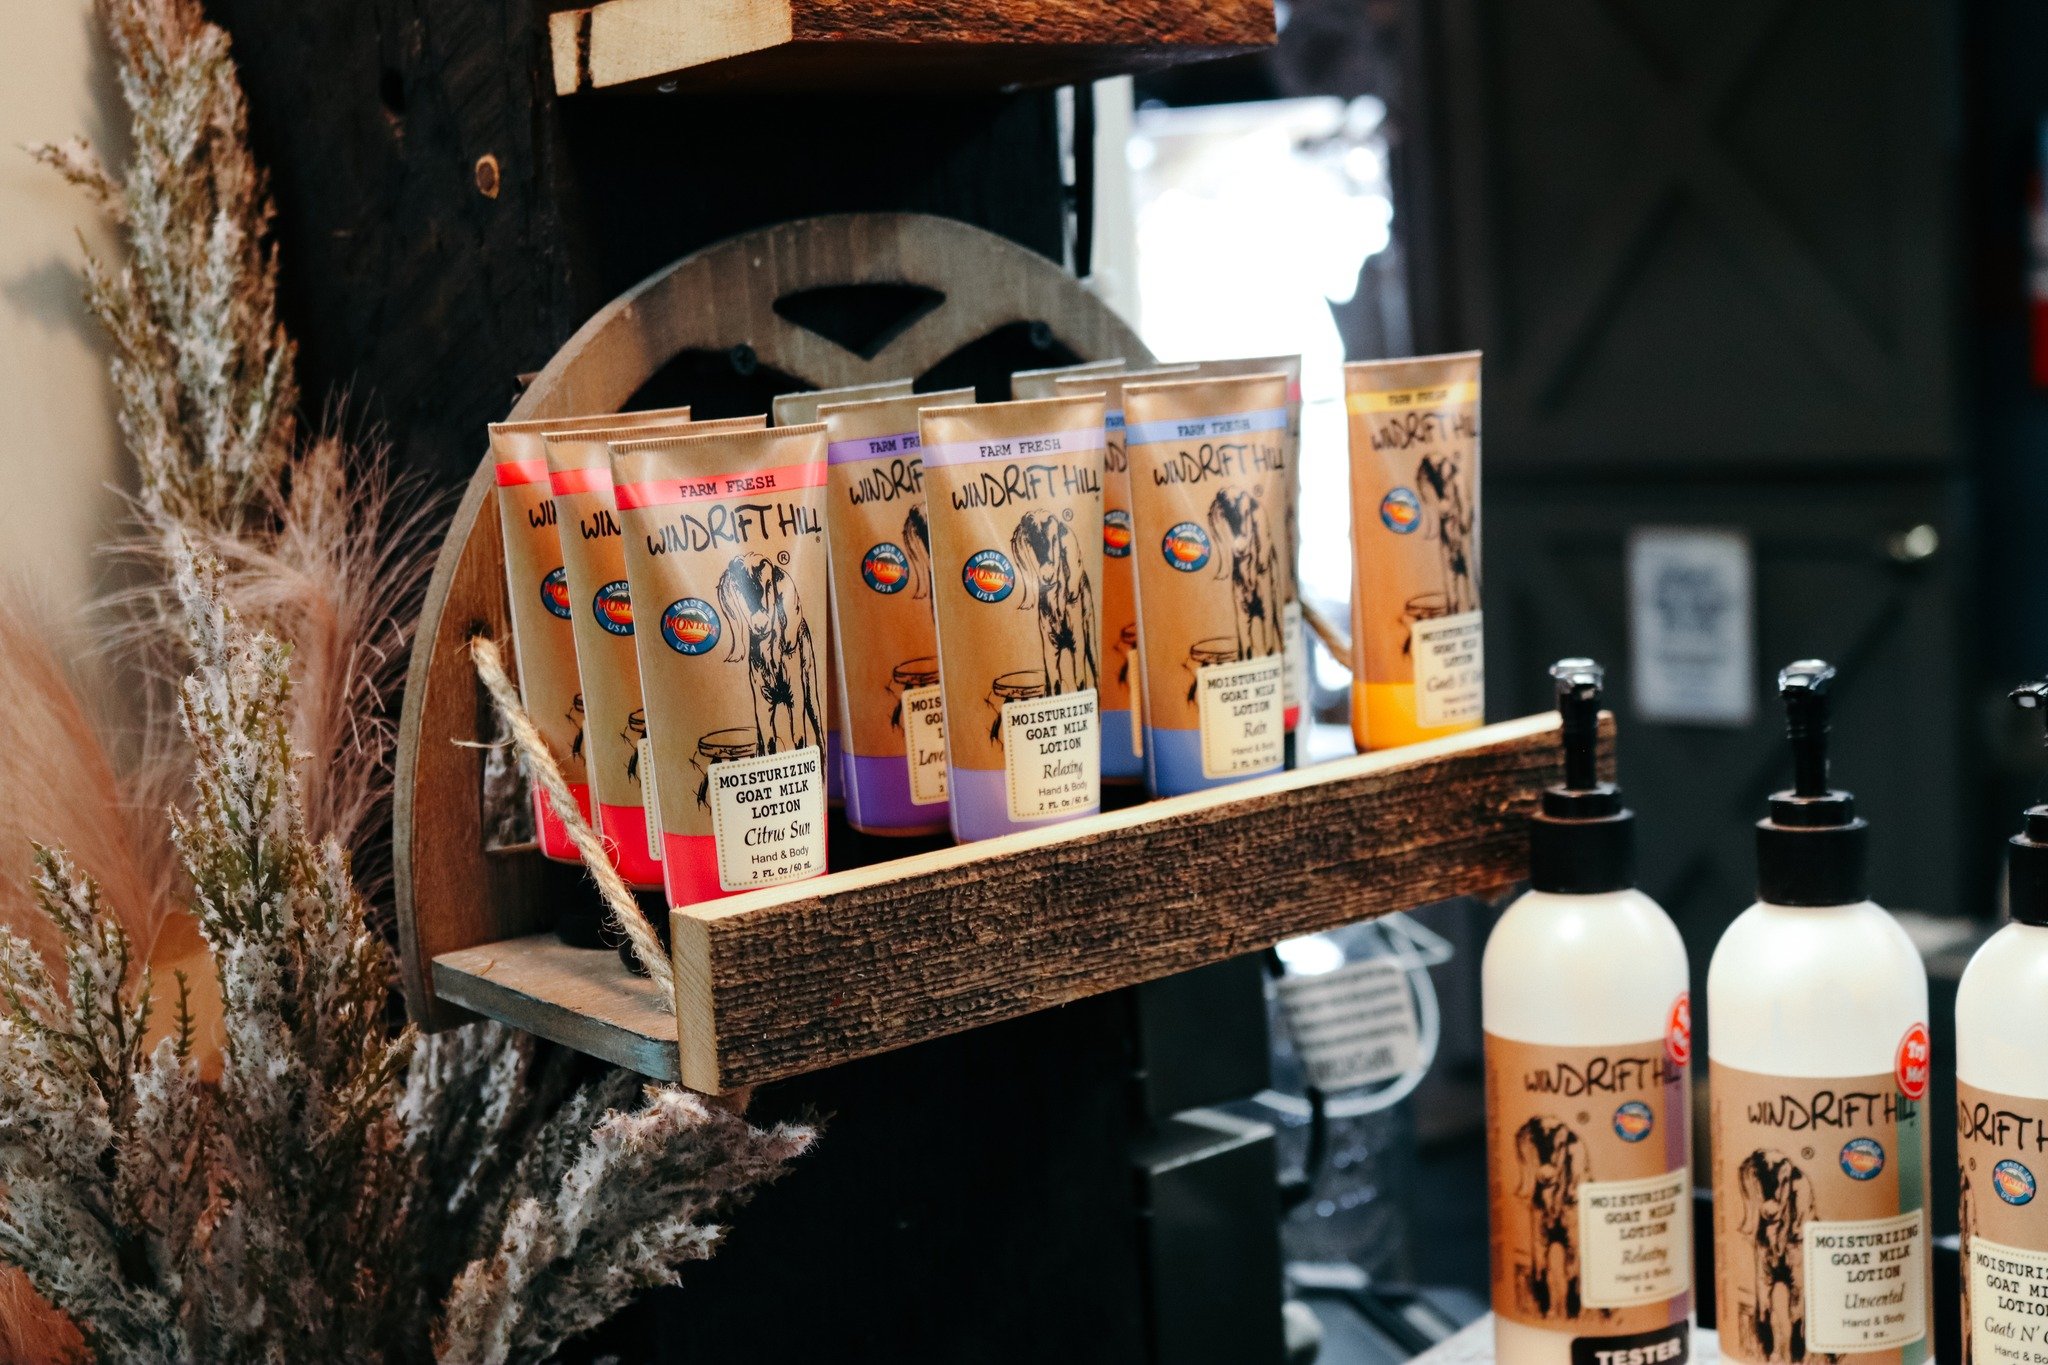 SHOP OUR WINDRIFT HILL PRODUCTS!

Goat milk is a natural moisturizer high in proteins, minerals, and vitamins that are easily absorbed into the skin. We feature lotions, body bars, body butters, bath salts, and more from this Montana company! Stop in